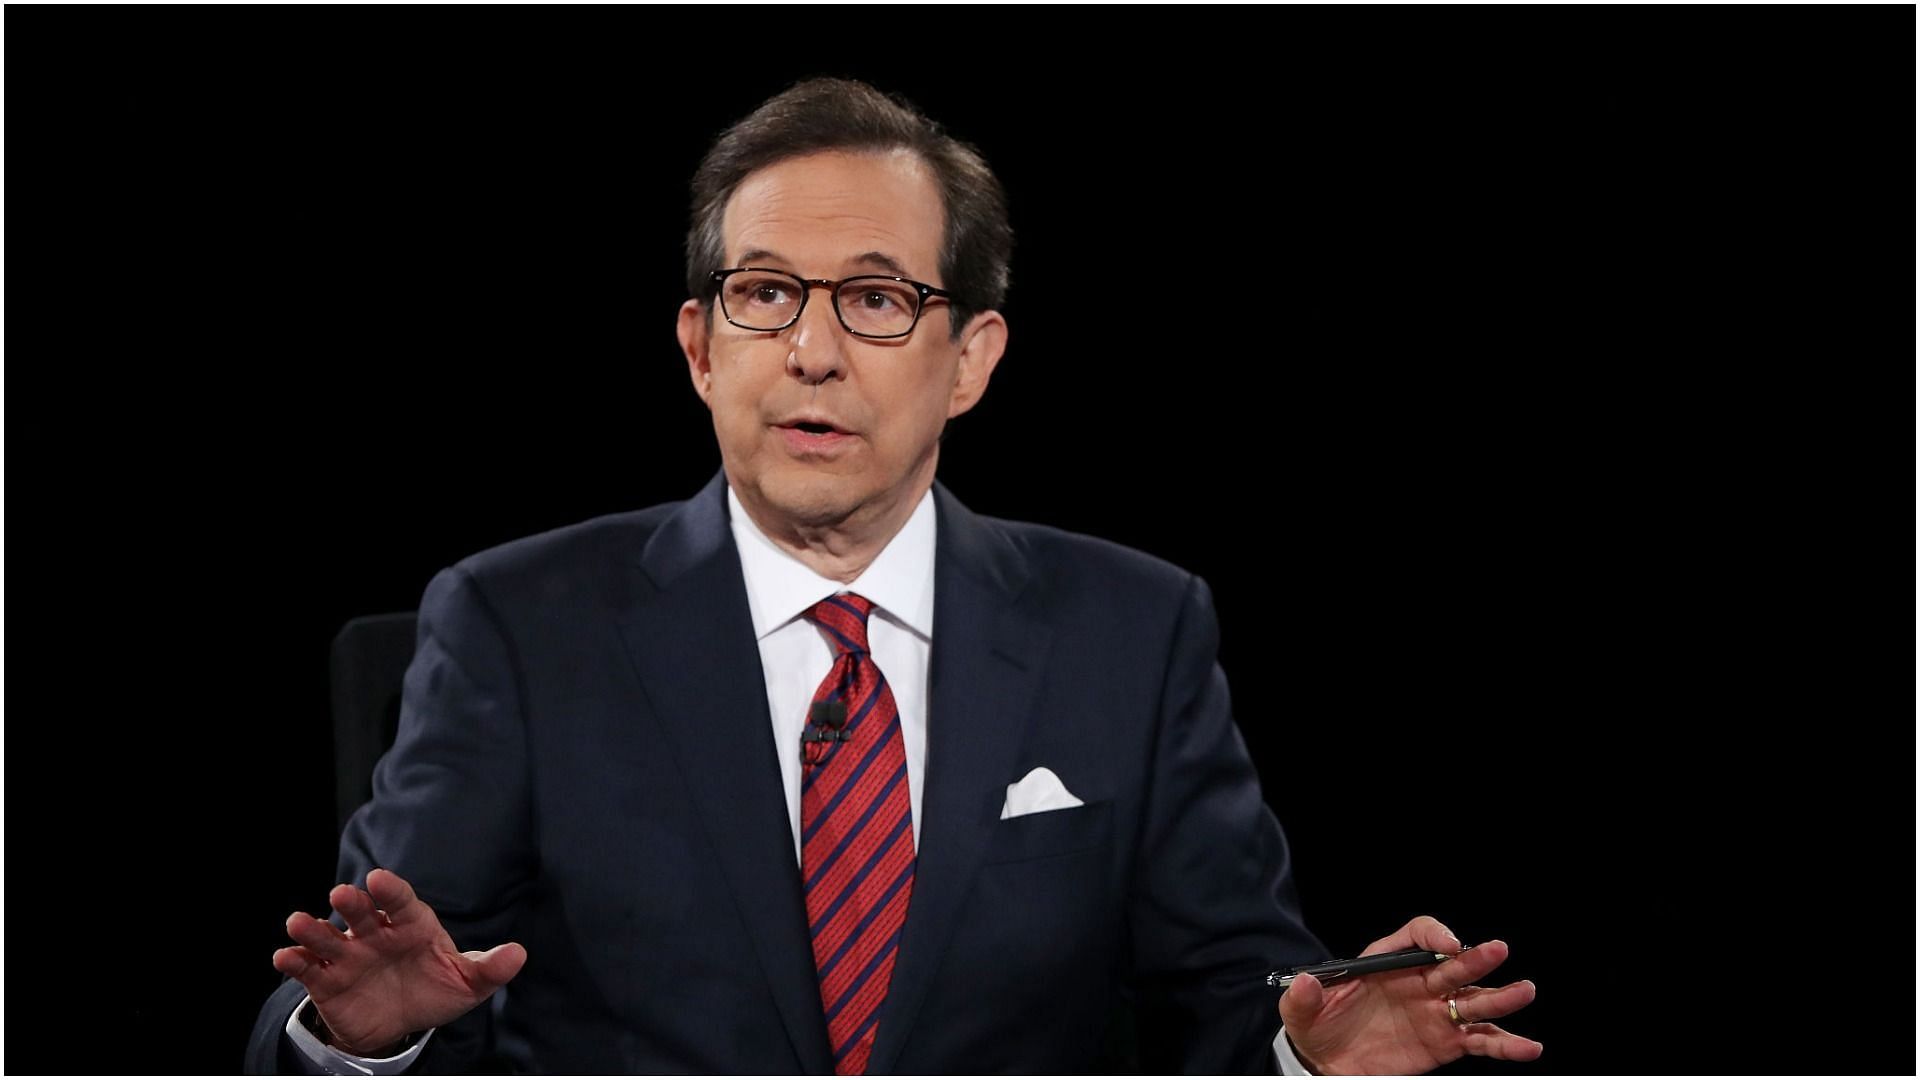 Chris Wallace has recently quit Fox News (Image by Joe Raedle via Getty Images)